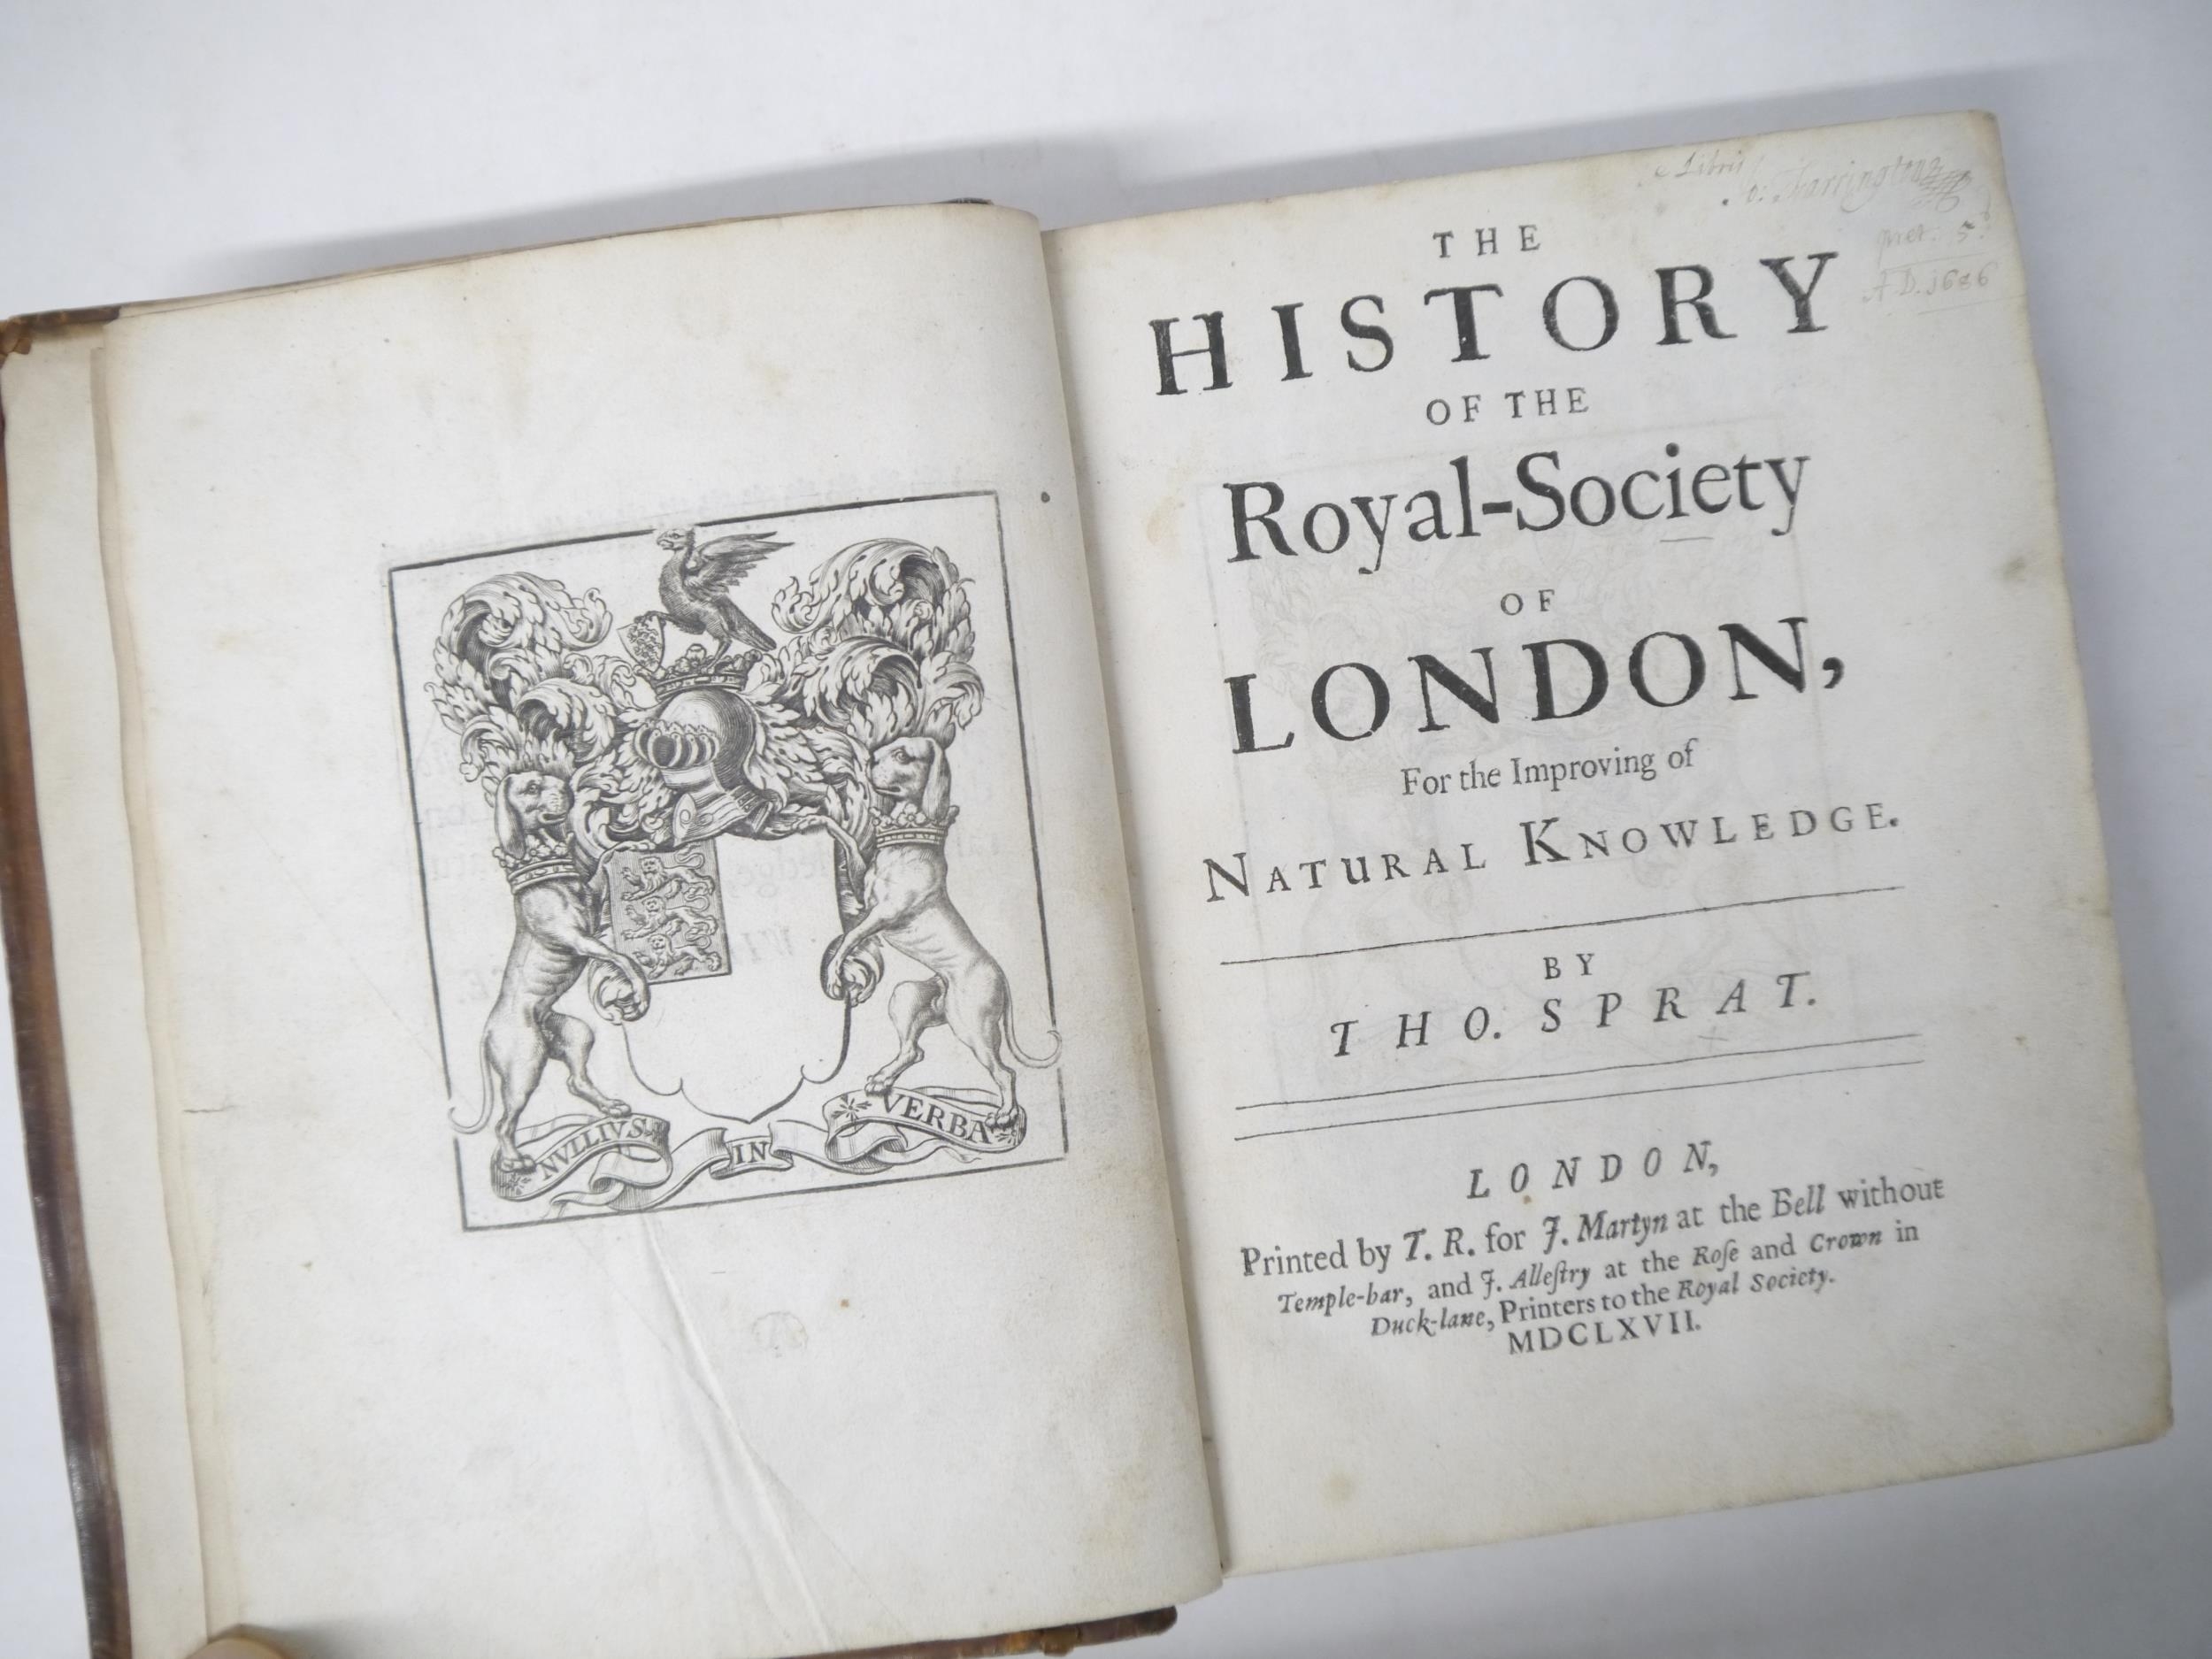 Thomas Sprat: 'The History of the Royal Society of London, for the Improving of Natural Knowledge.',